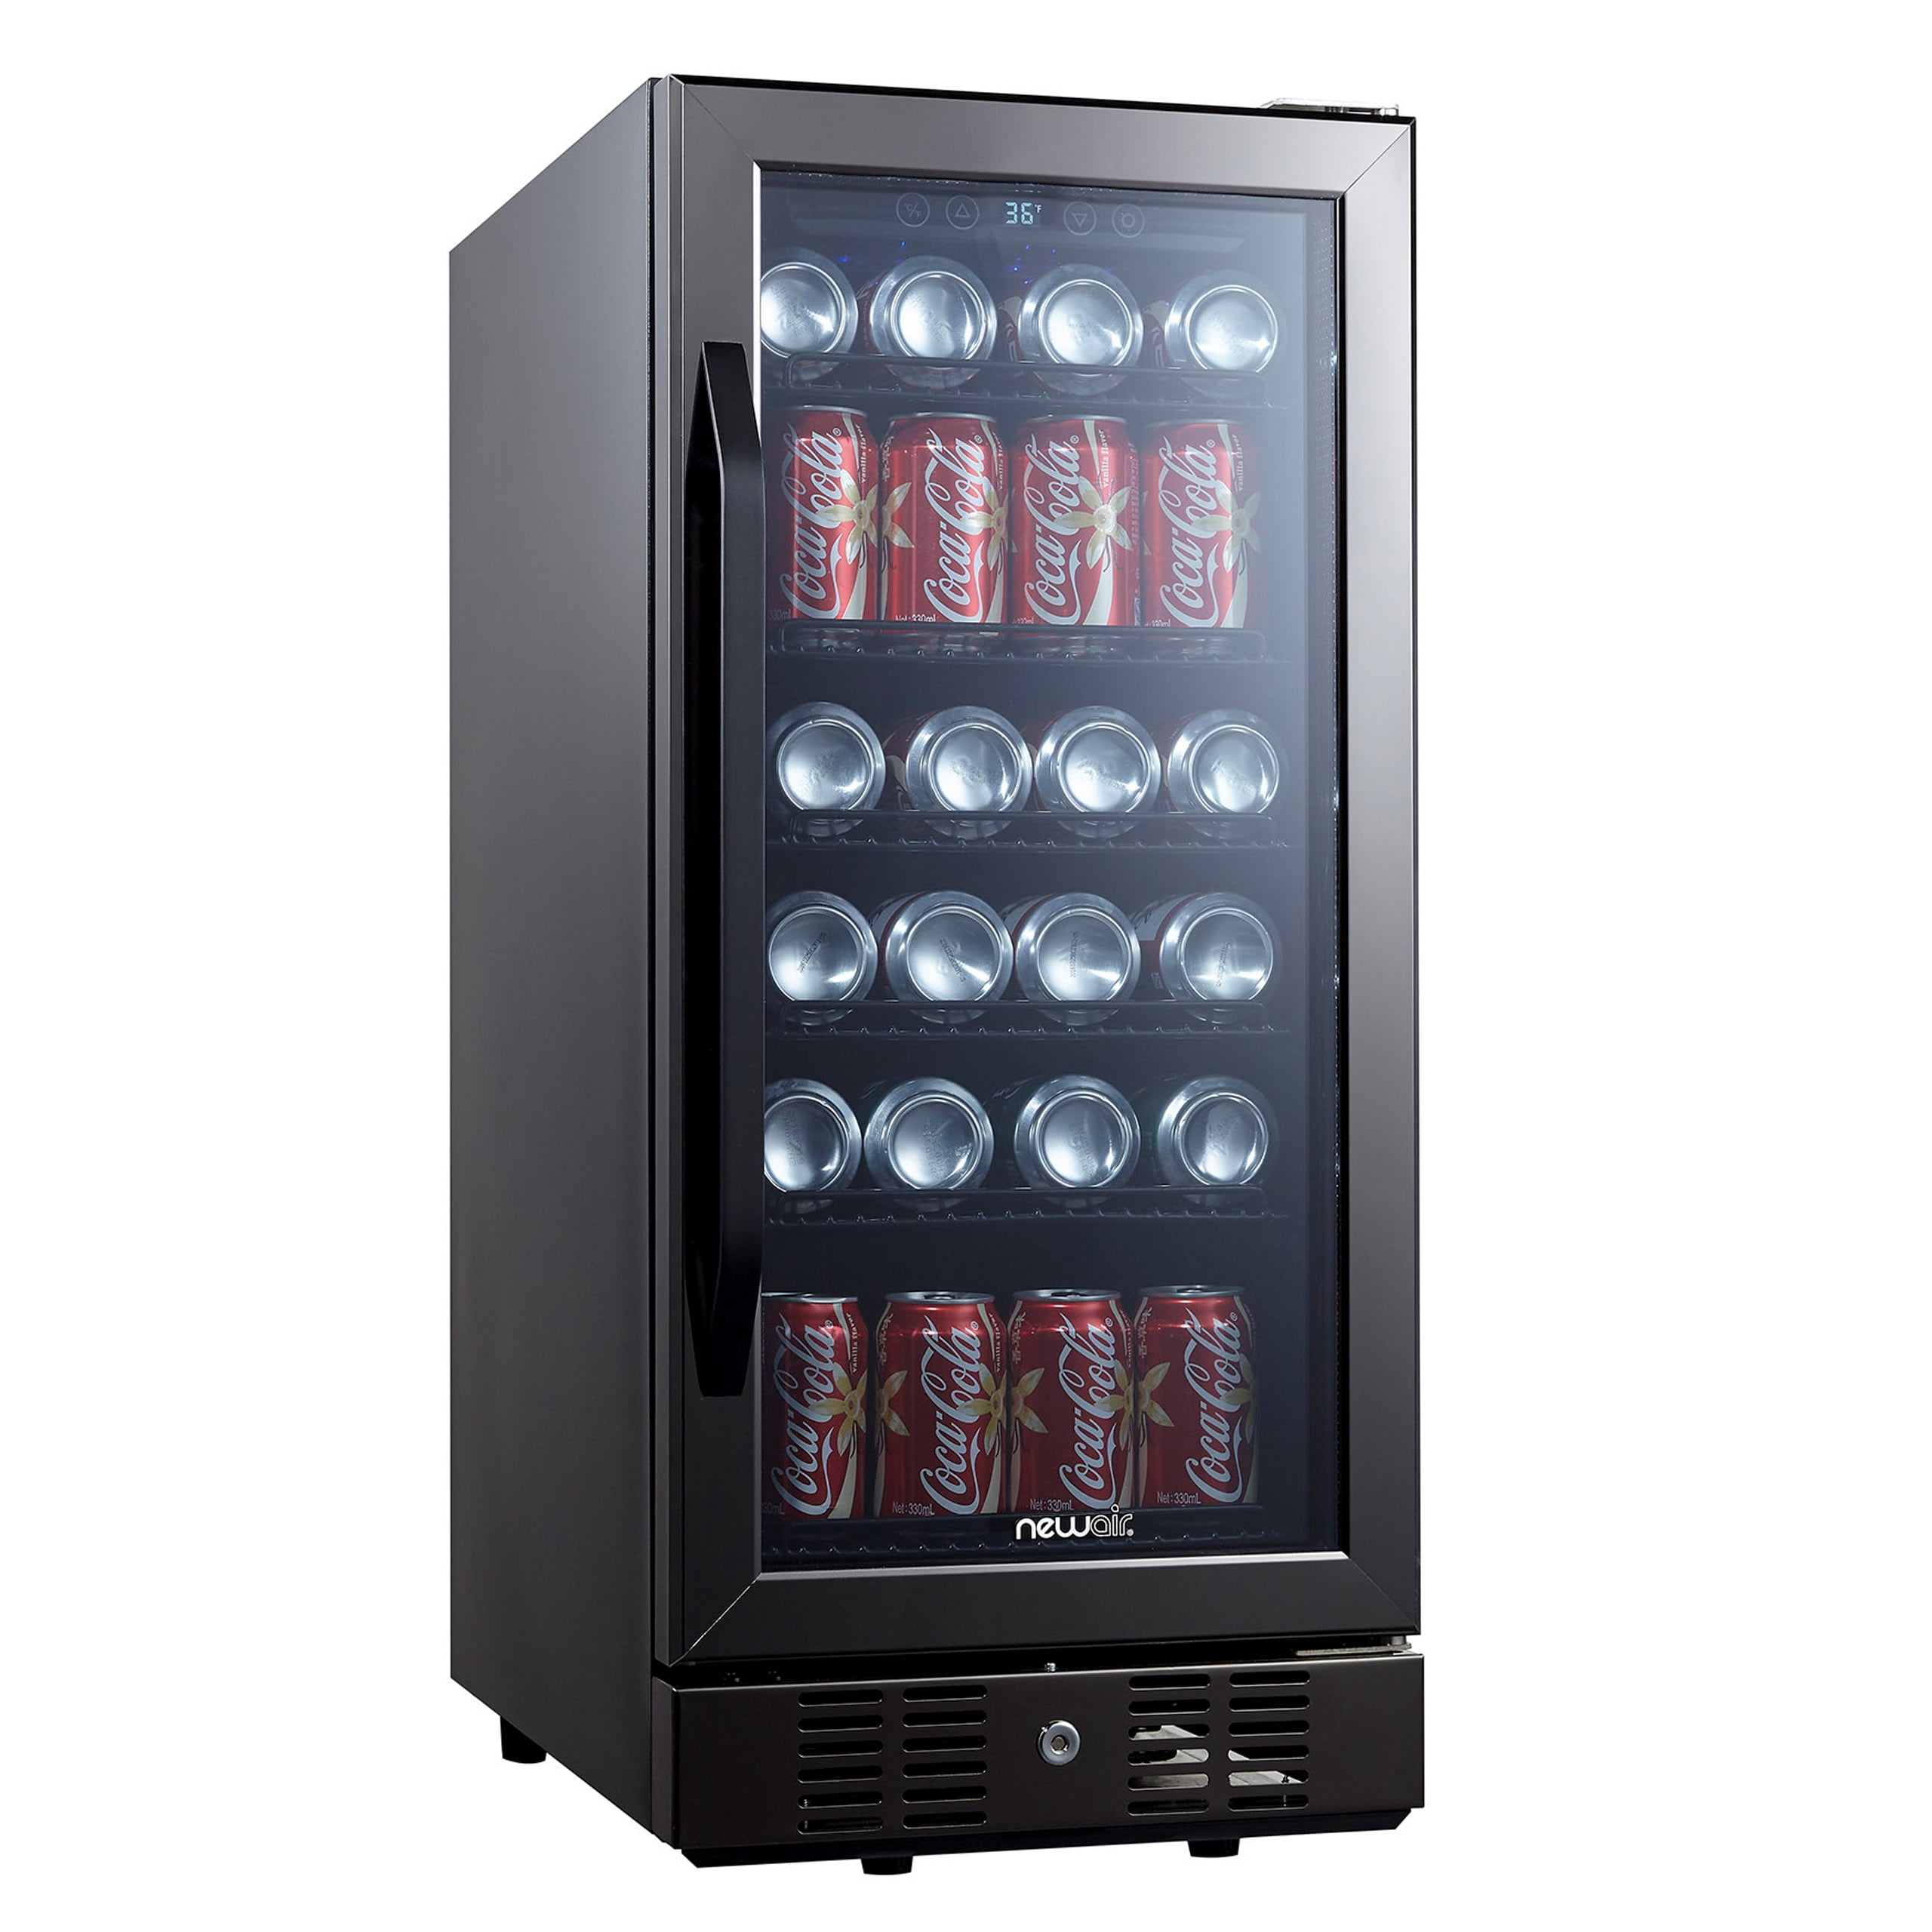 NewAir Beverage Cooler 96 Can Capacity Refrigerator, Perfect for Soda Black Stainless Steel Wine And Beverage Cooler